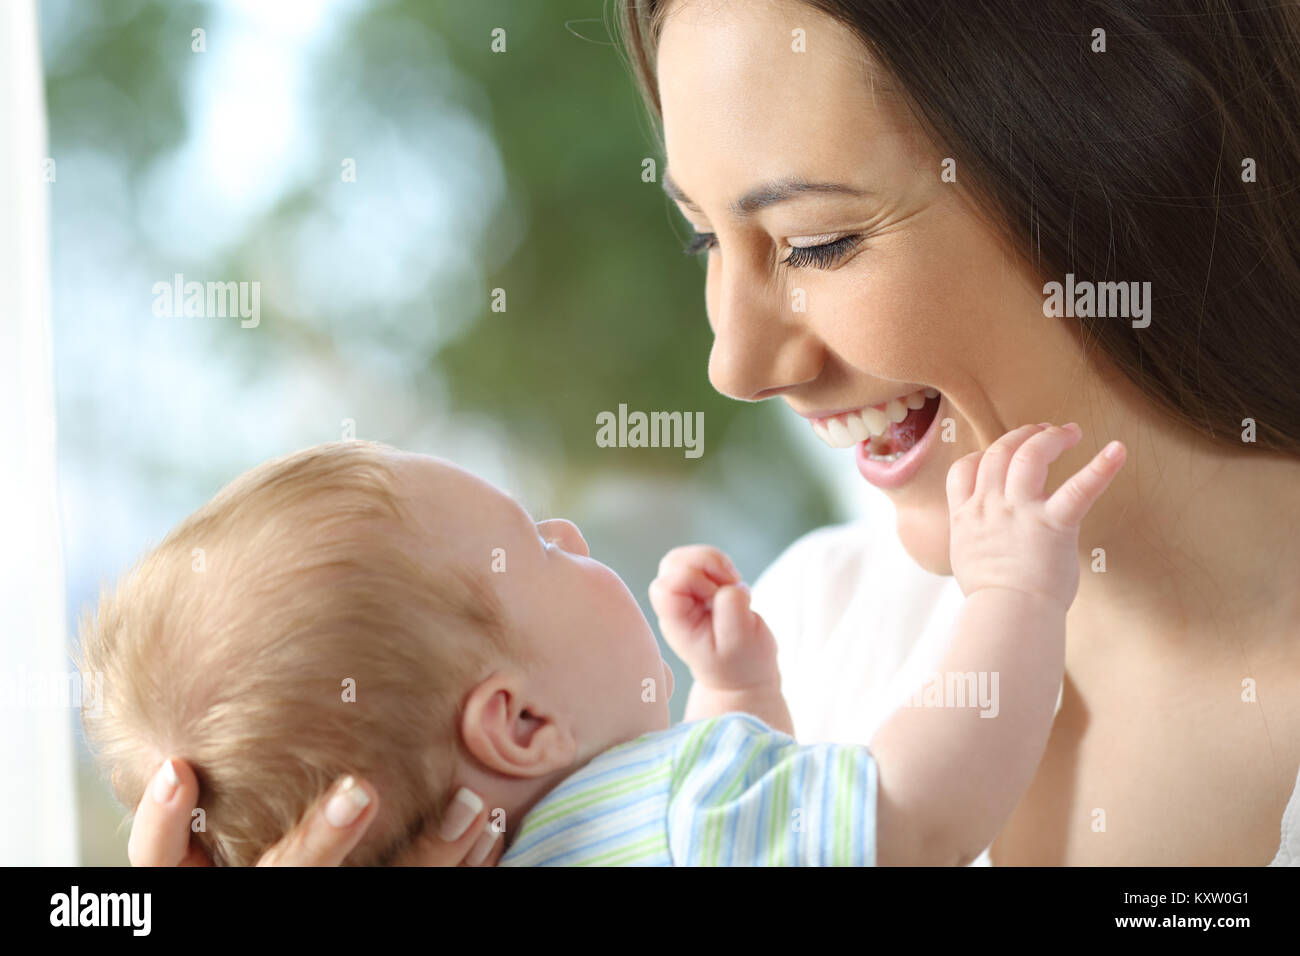 Close up portrait of a happy mother looking at her newborn baby Stock Photo